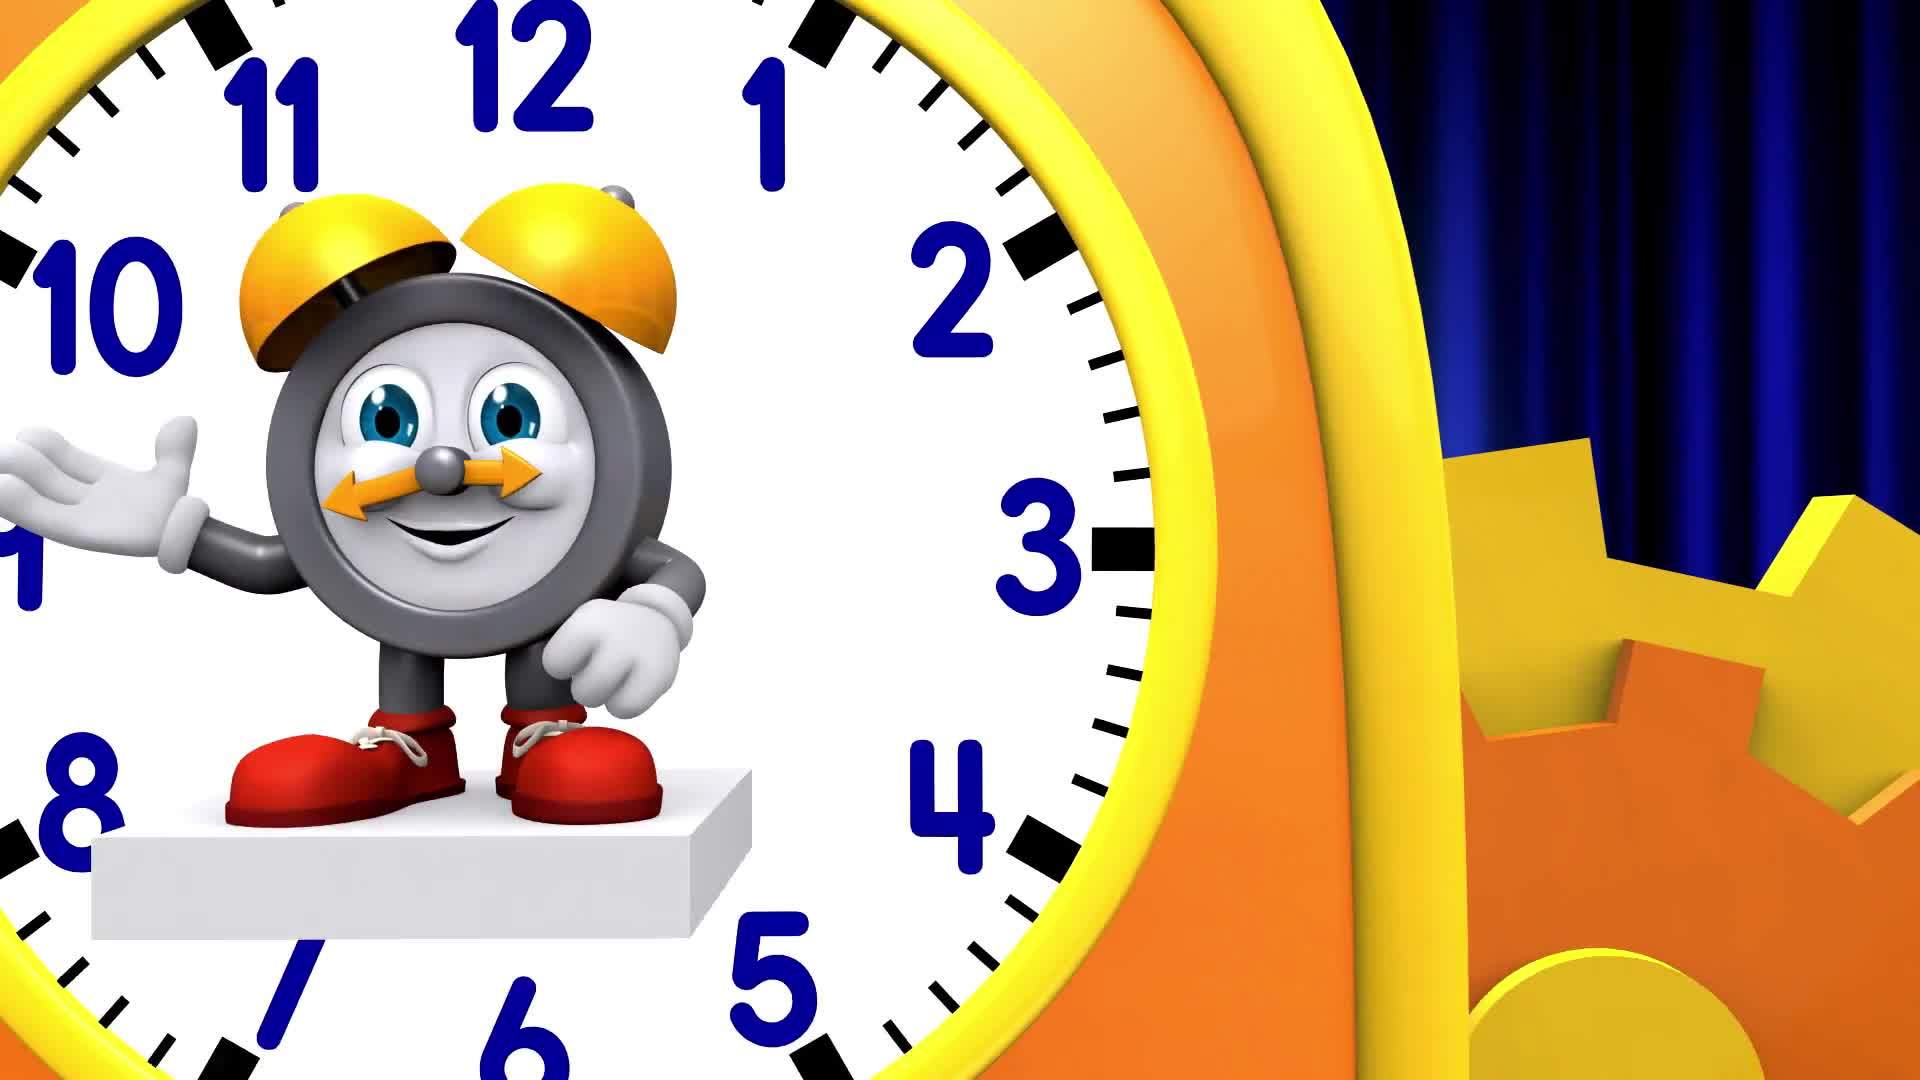 Telling Time - How to Read the Clock